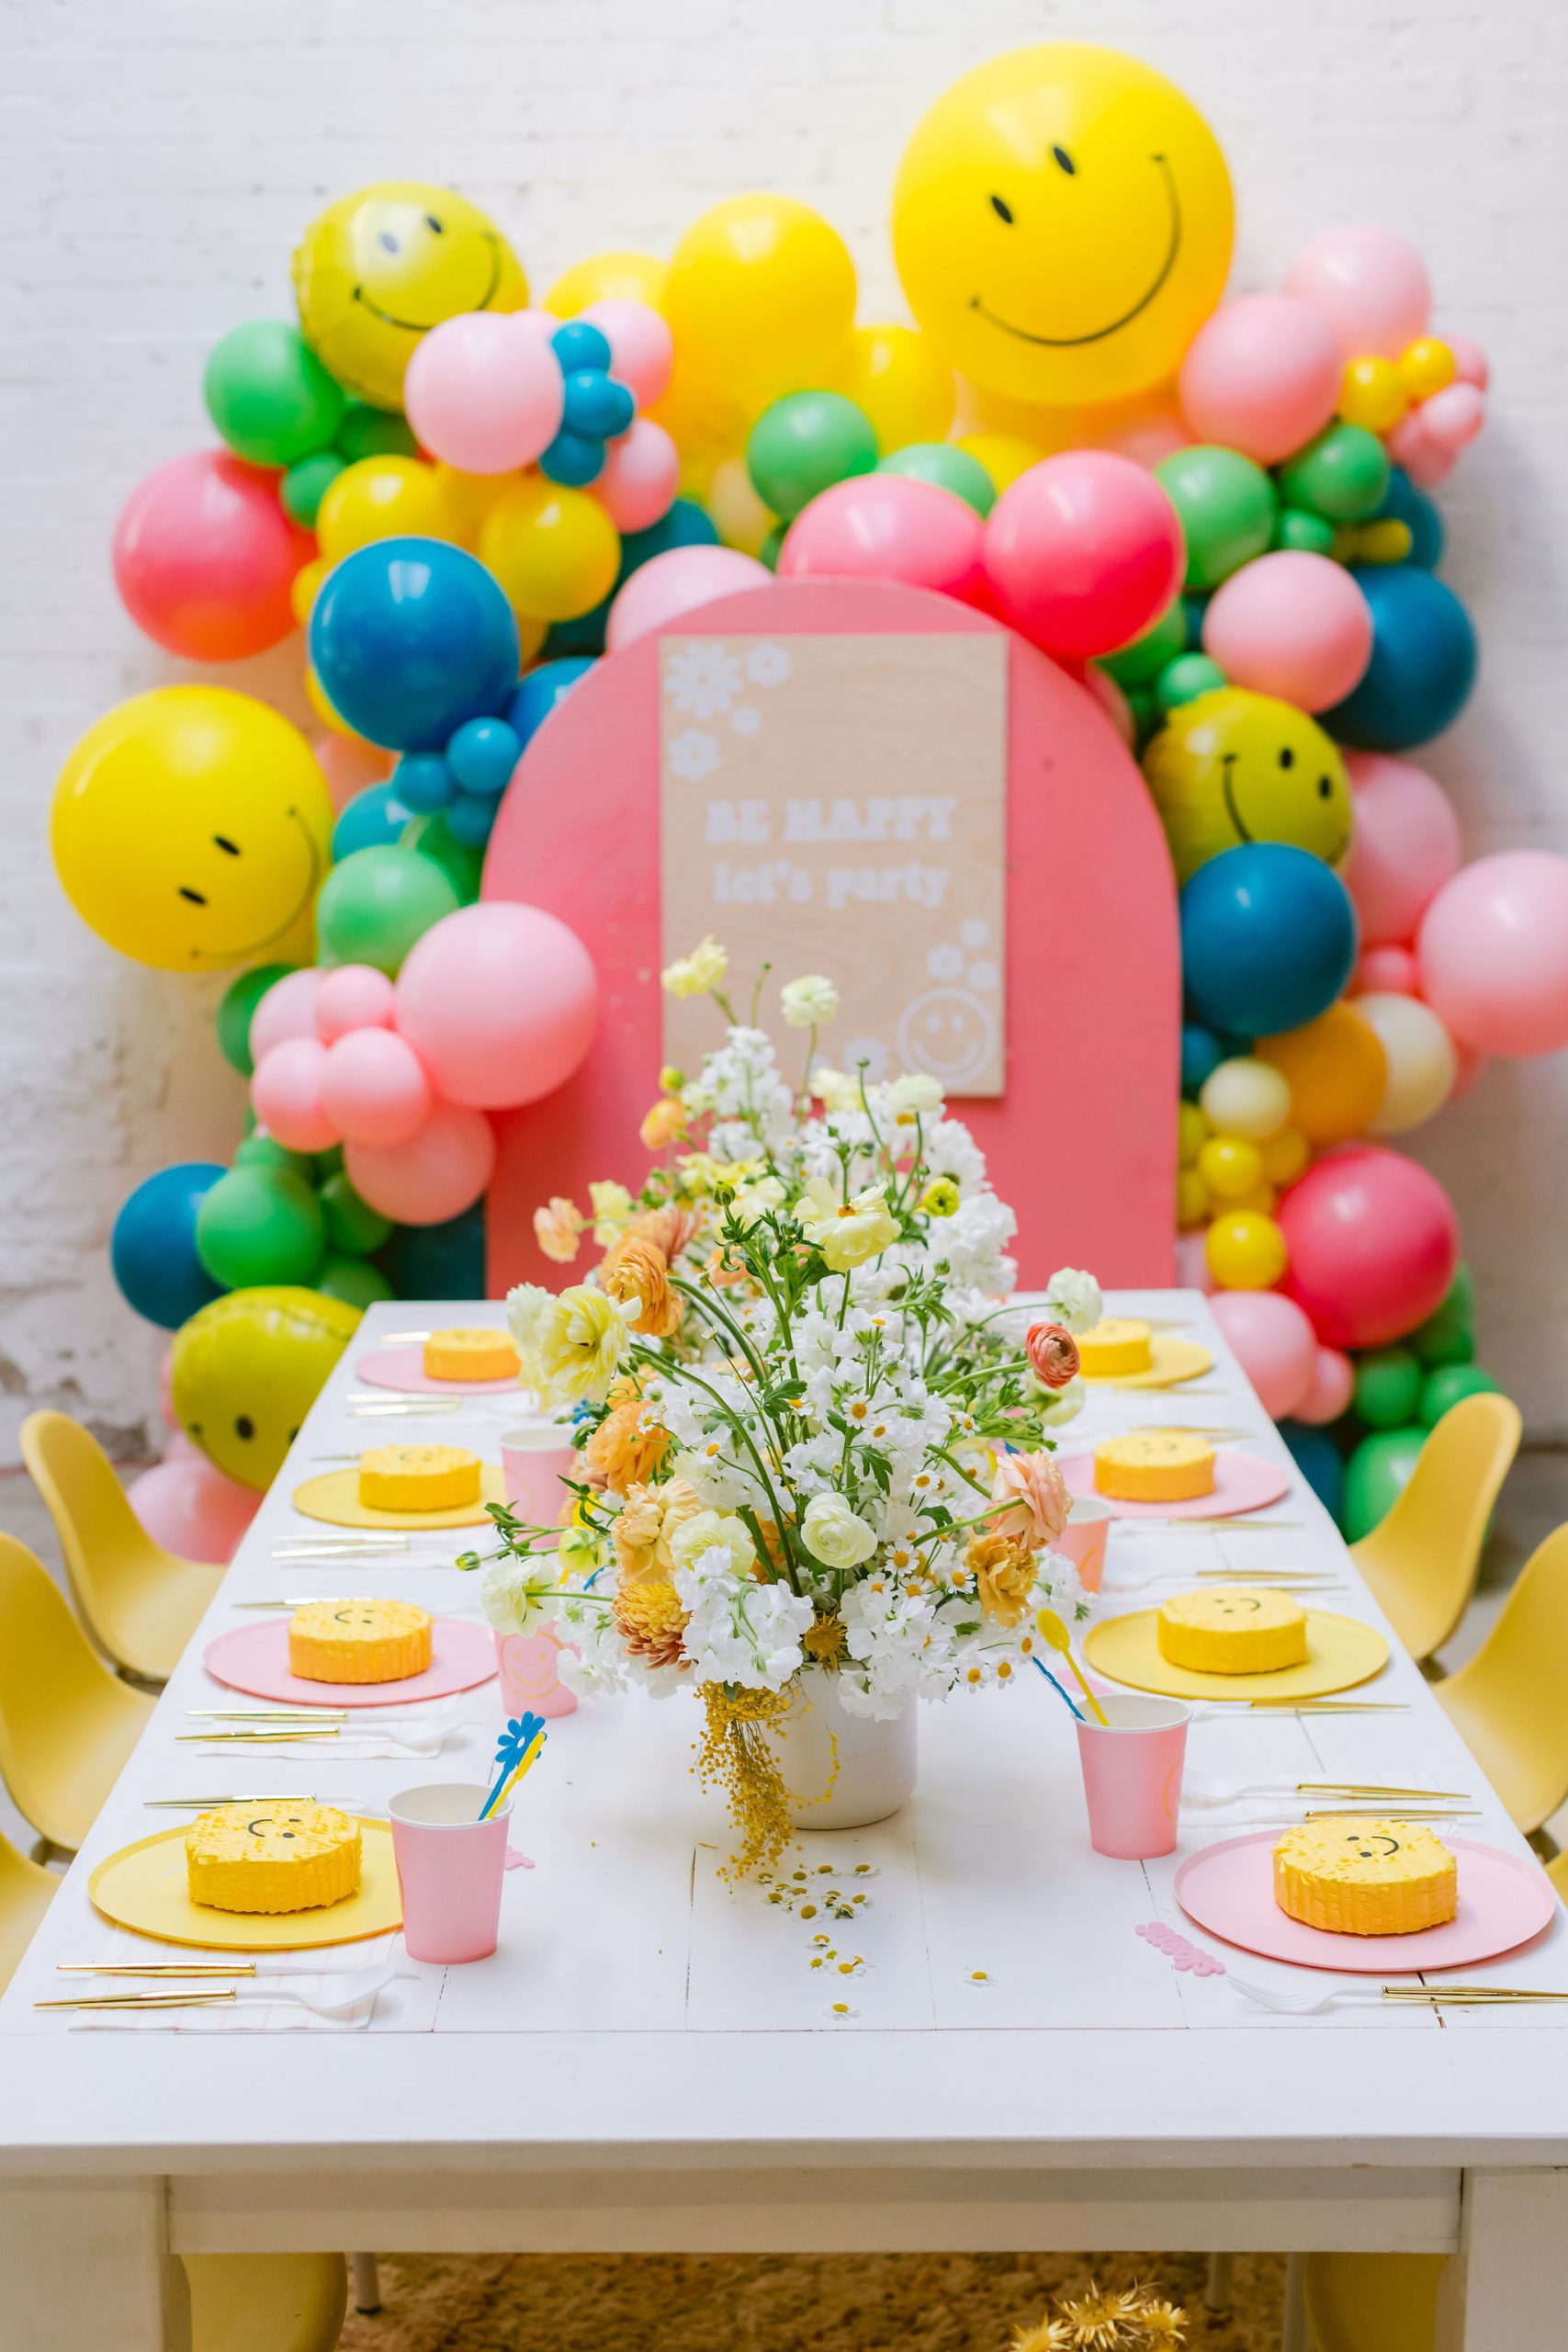 Happy Smiley Face Party for girls birthday party ideas